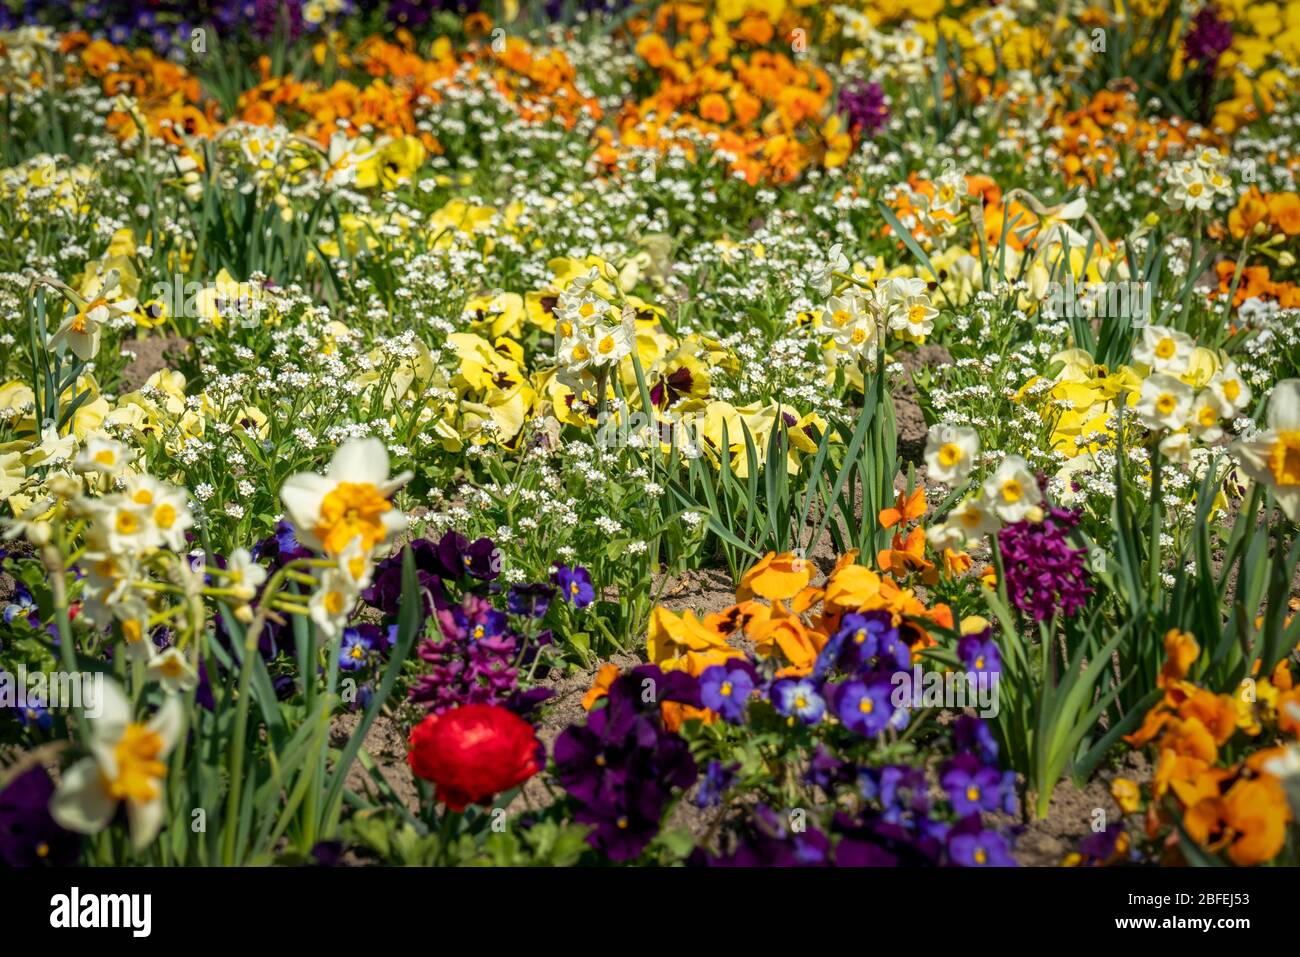 Very colorful spring flower bed with daffodils, pansies, buttercups and hyacinths Stock Photo